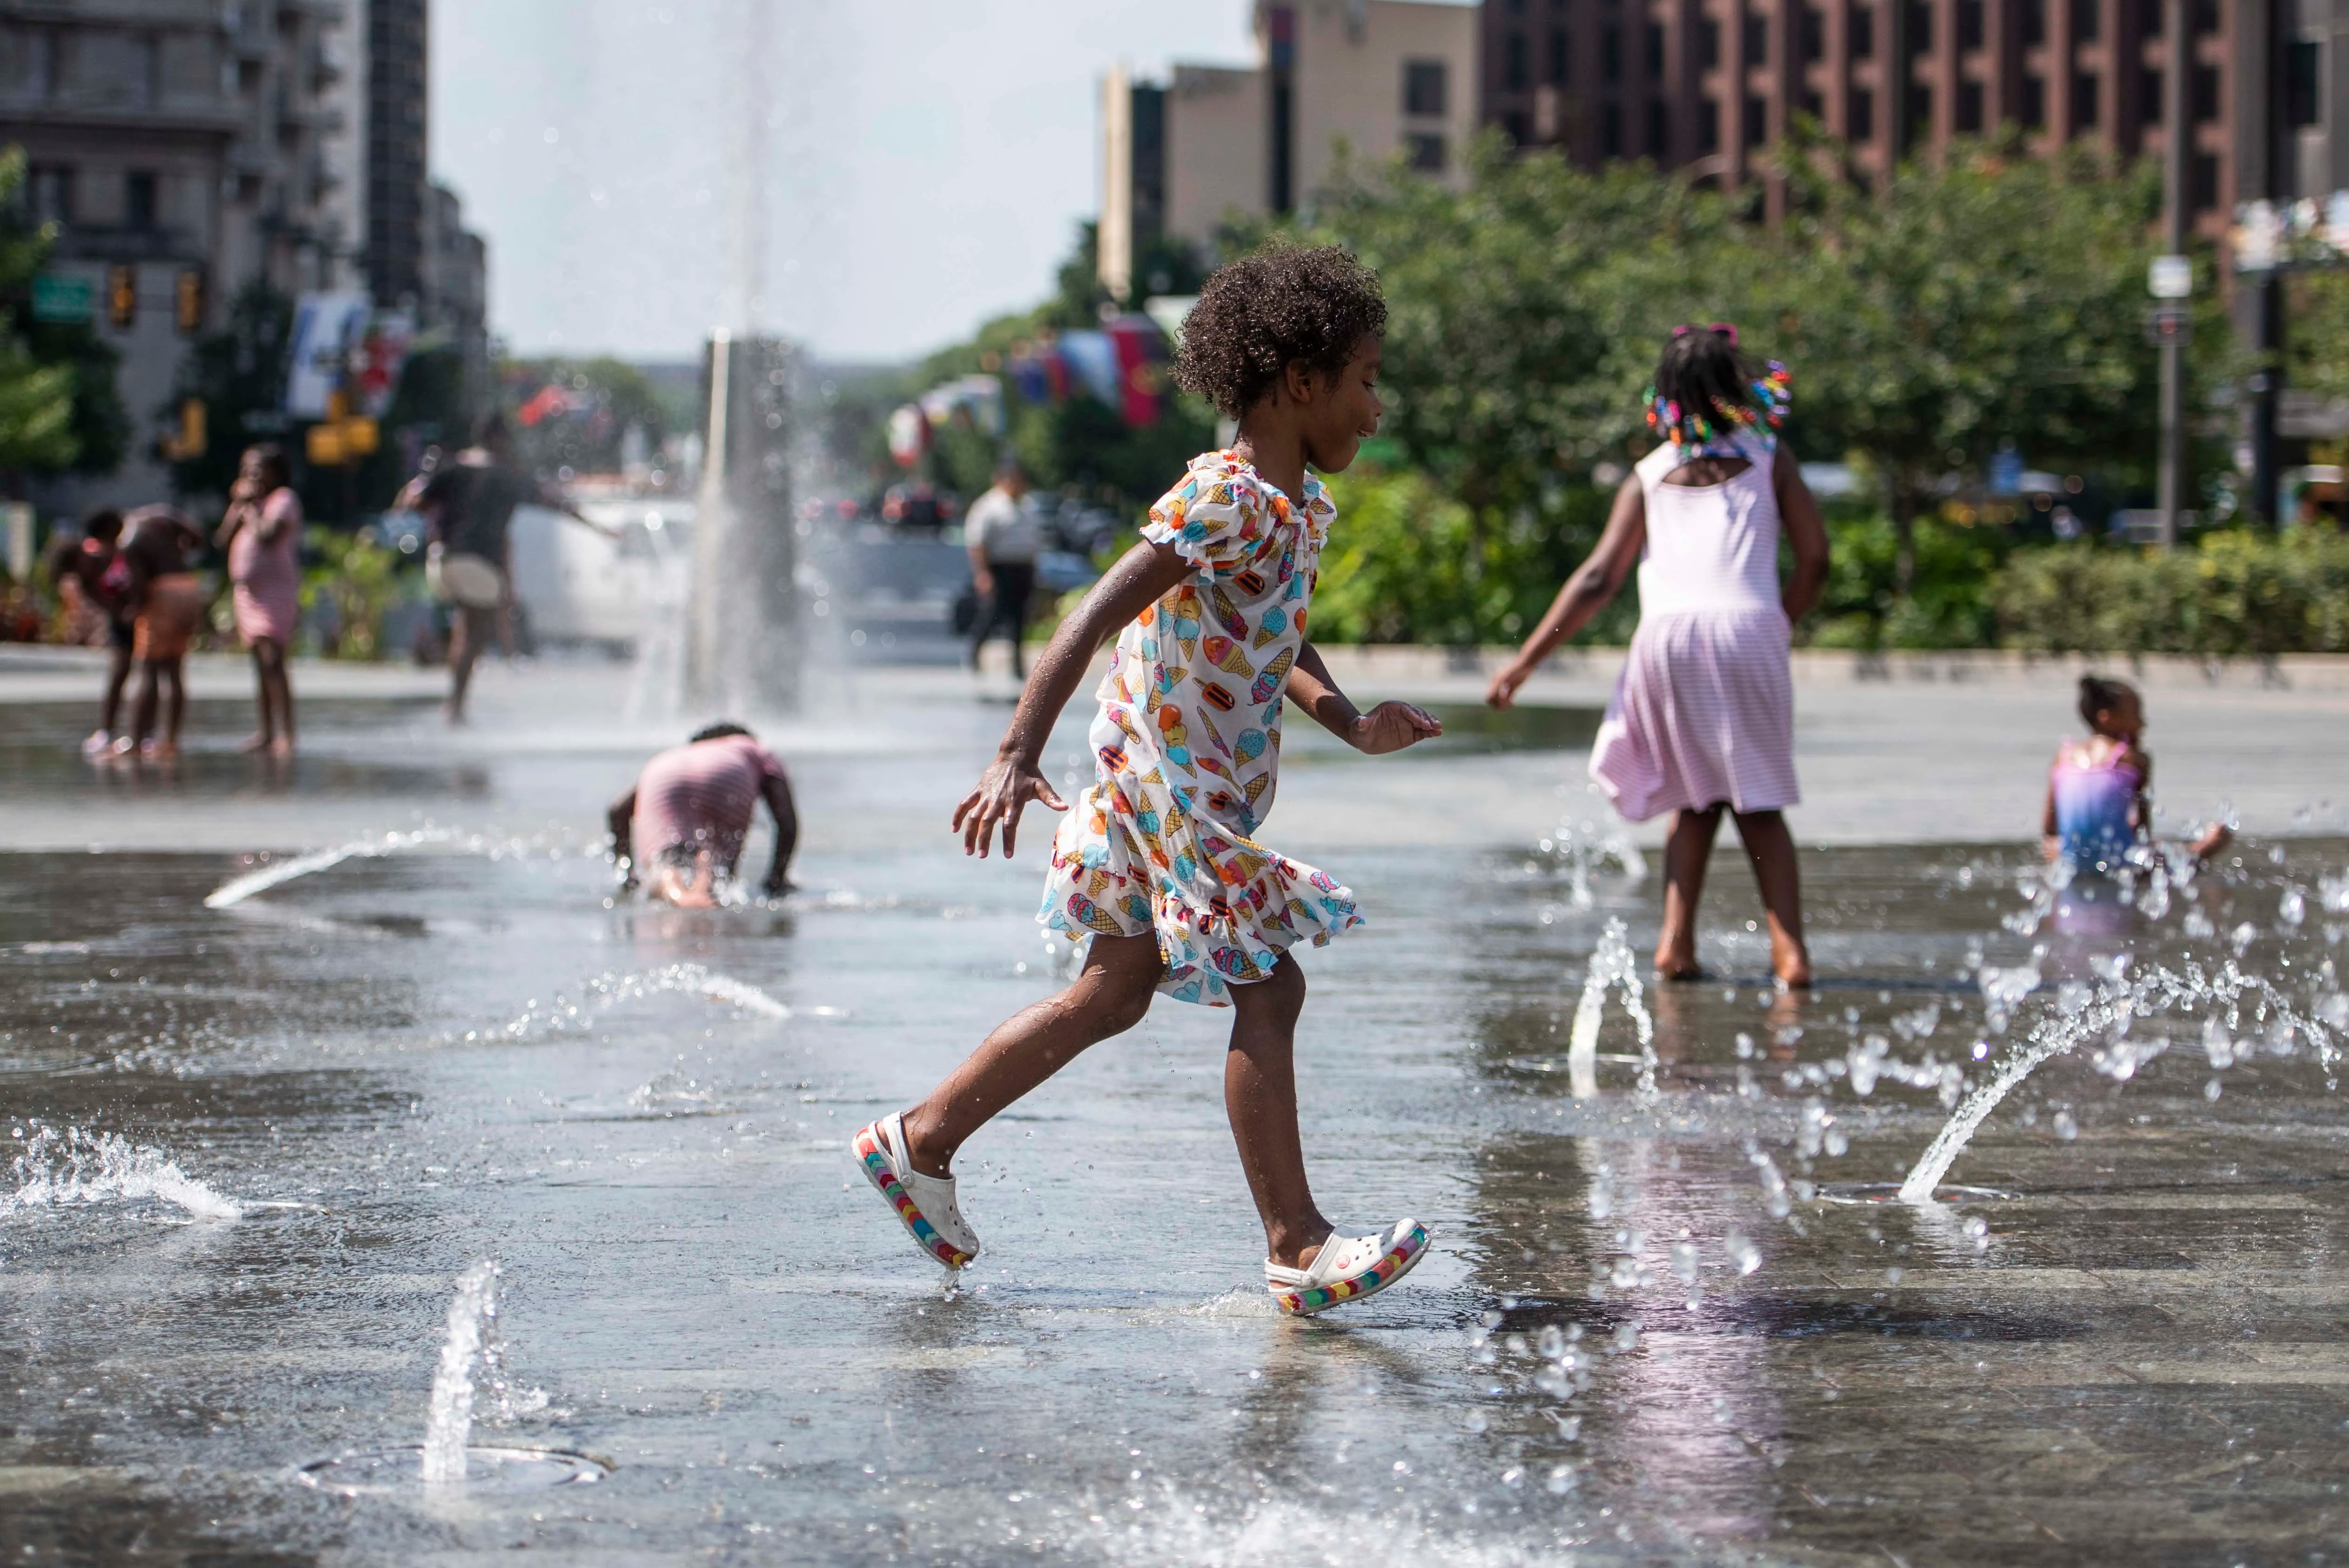 A child runs across the splash pad at Love Park on Friday, July 28, 2023. A heat wave hit the Philadelphia region on Friday, with temperatures reaching nearly 100 degrees.